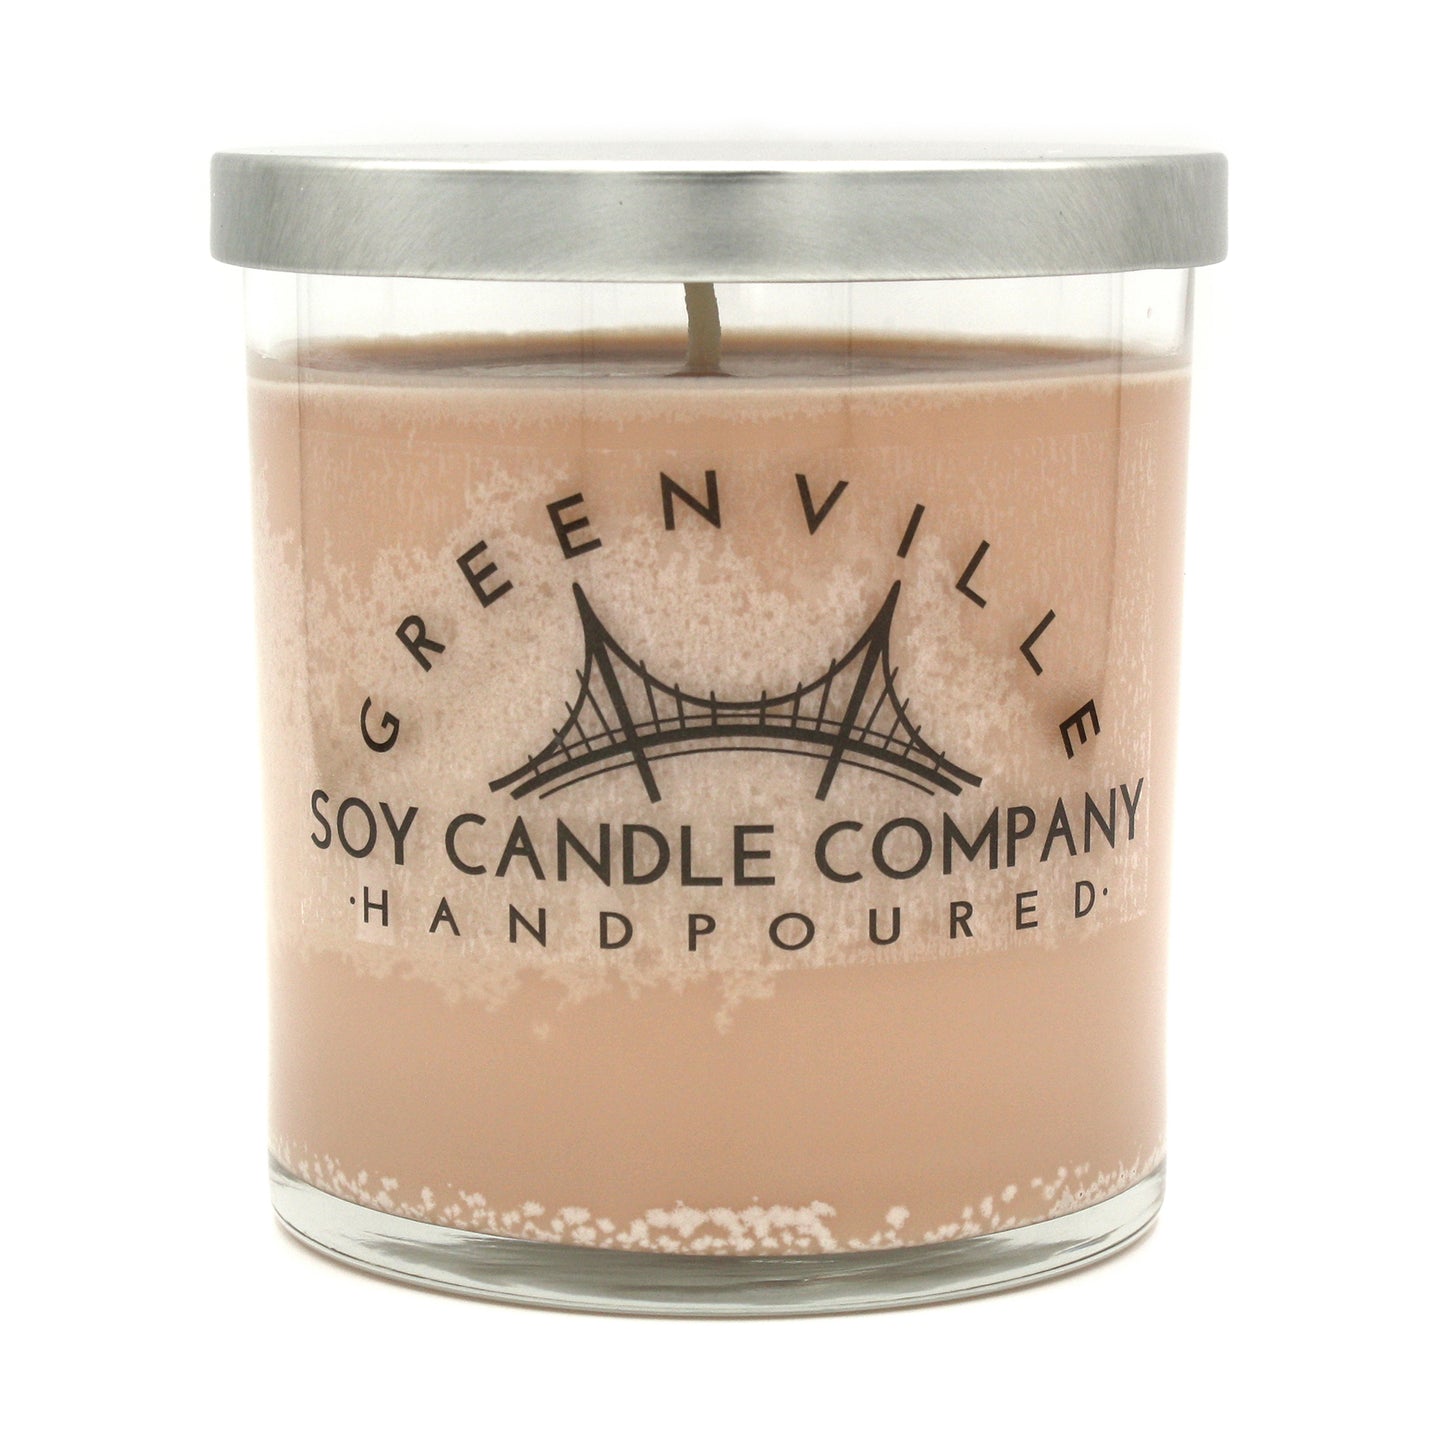 Cookie Shop, 10oz Soy Candle